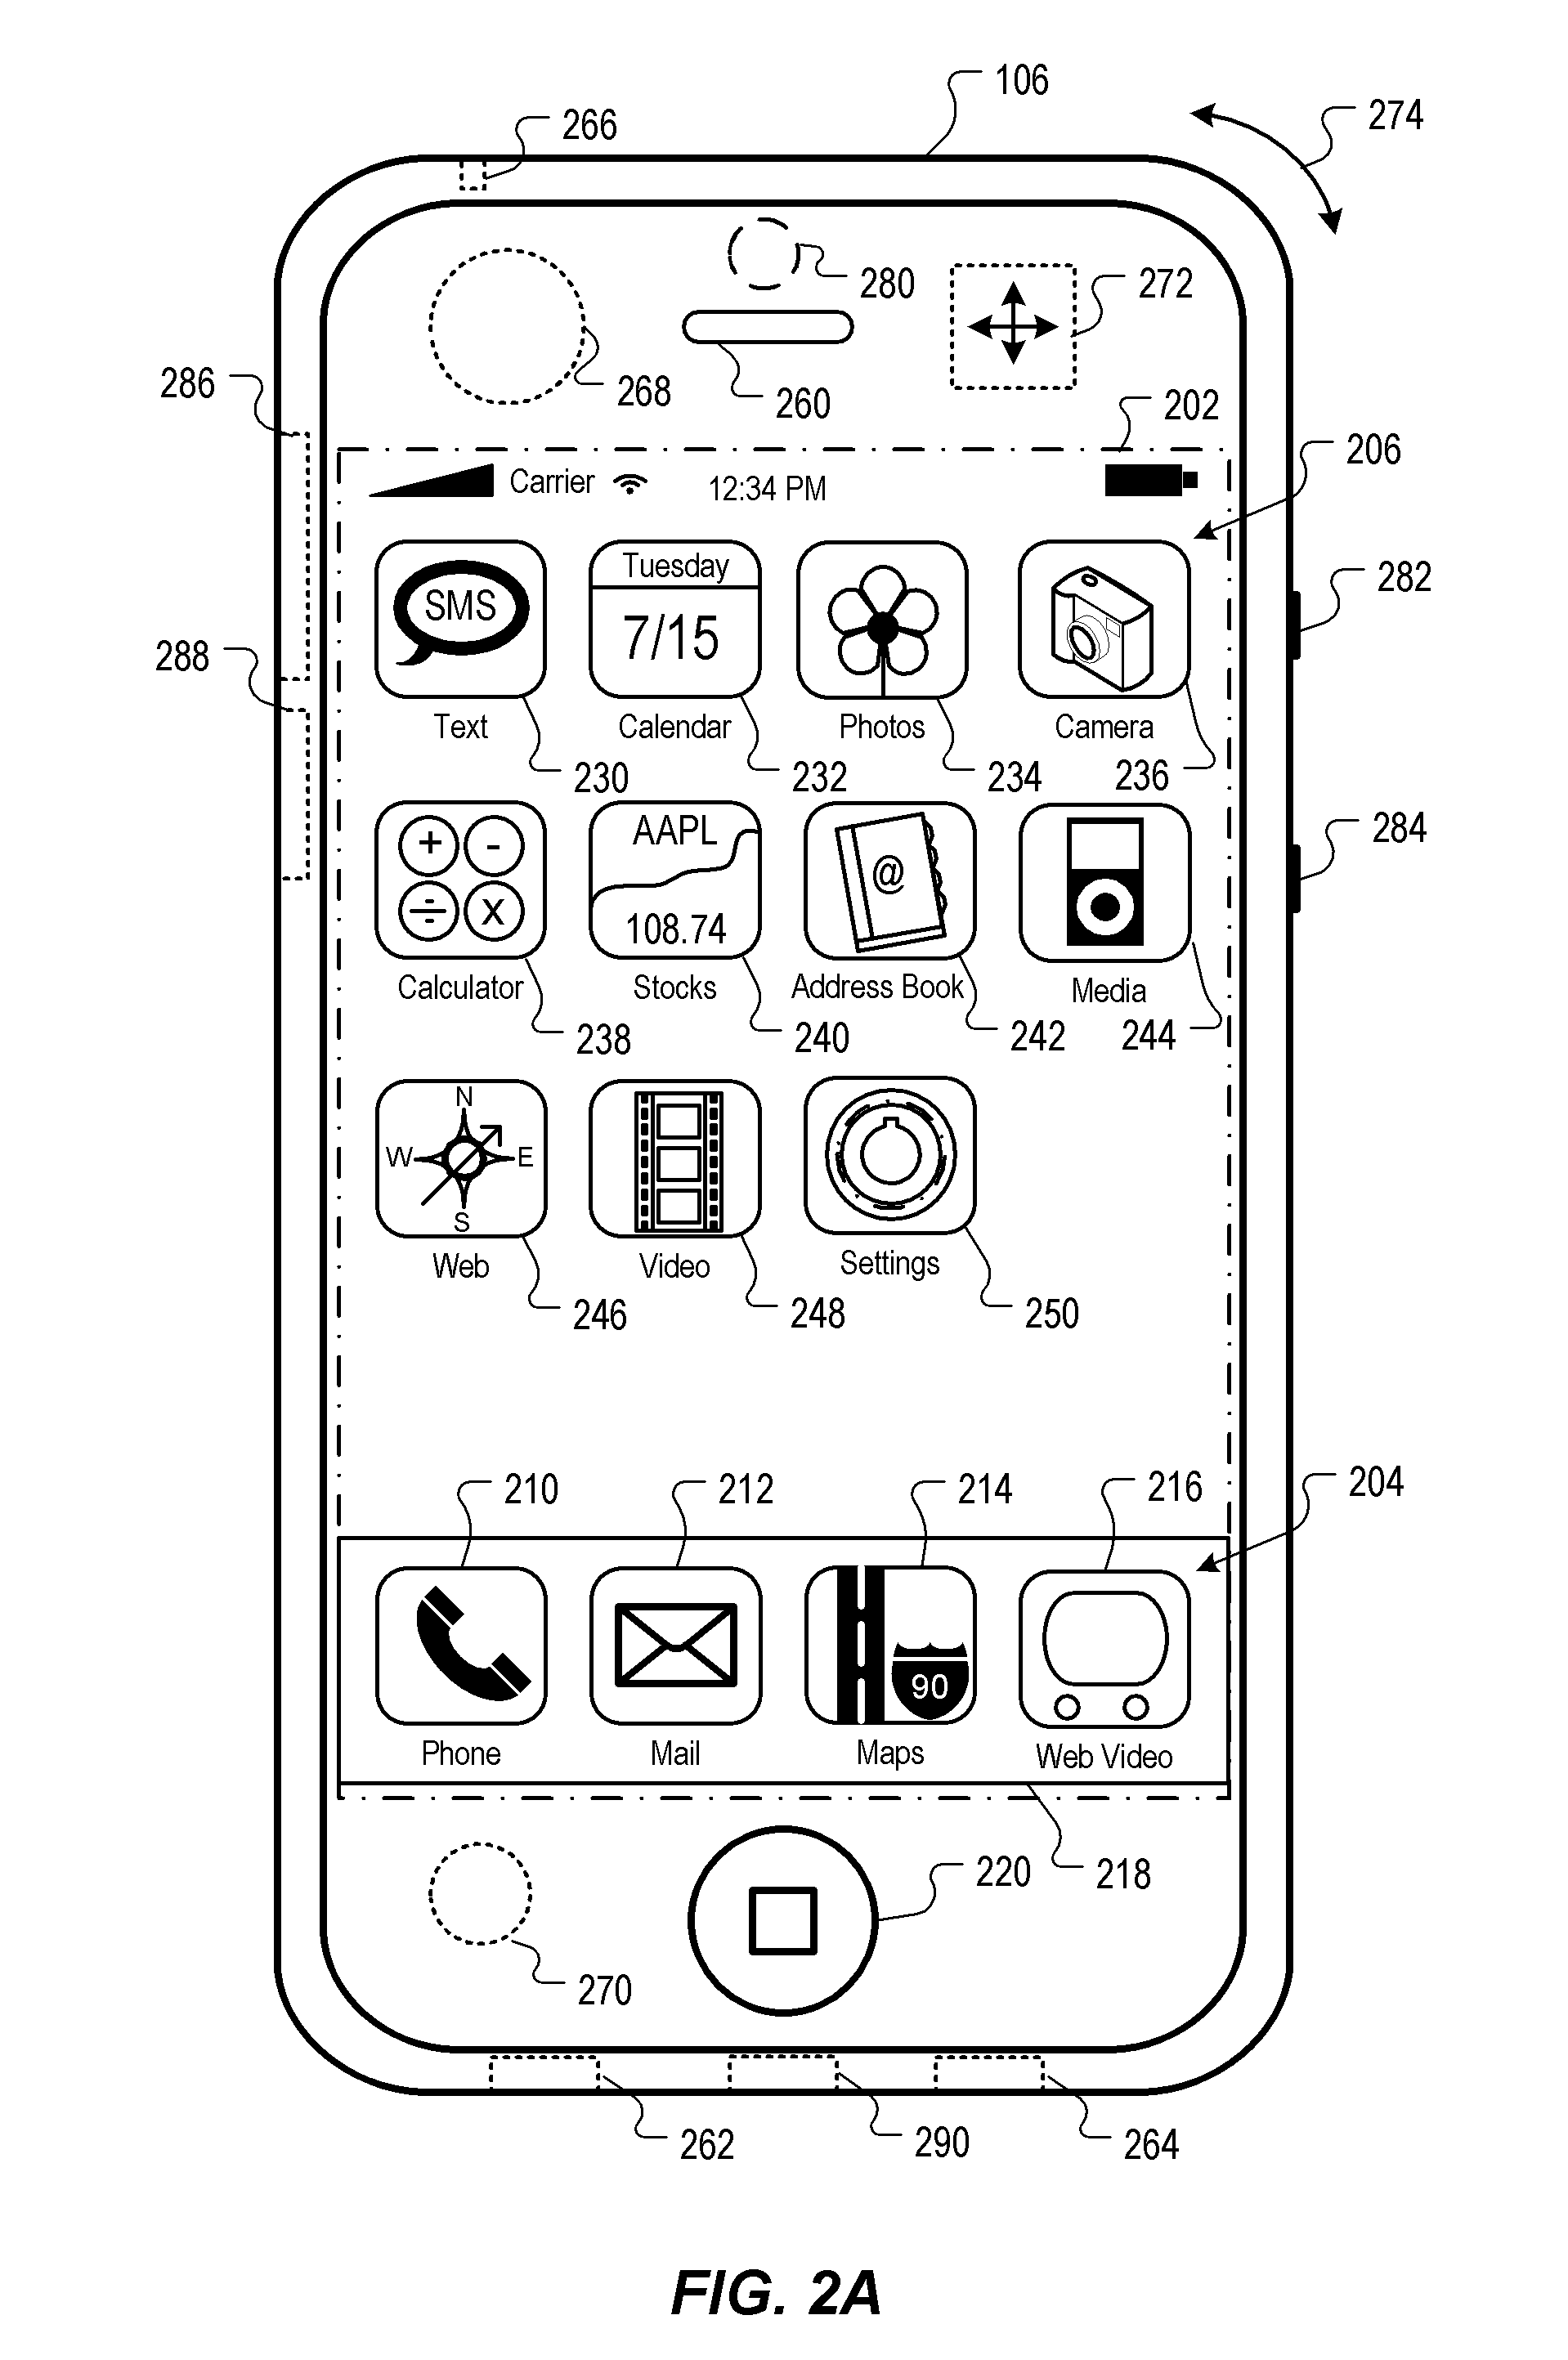 Managing securely installed applications